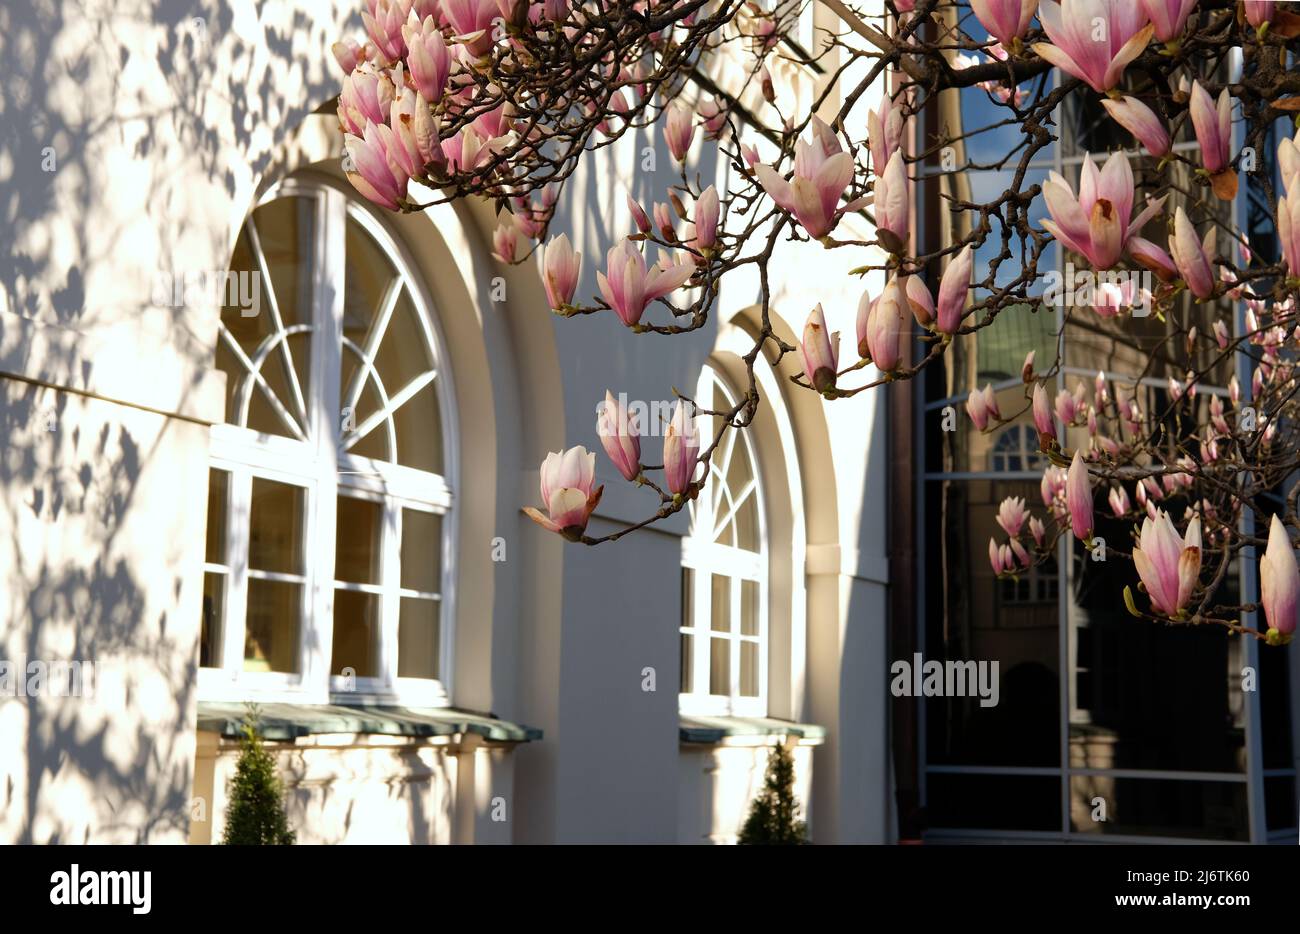 pink magnolia flowers (Magnoliaceae) in bloom against arched windows Stock Photo